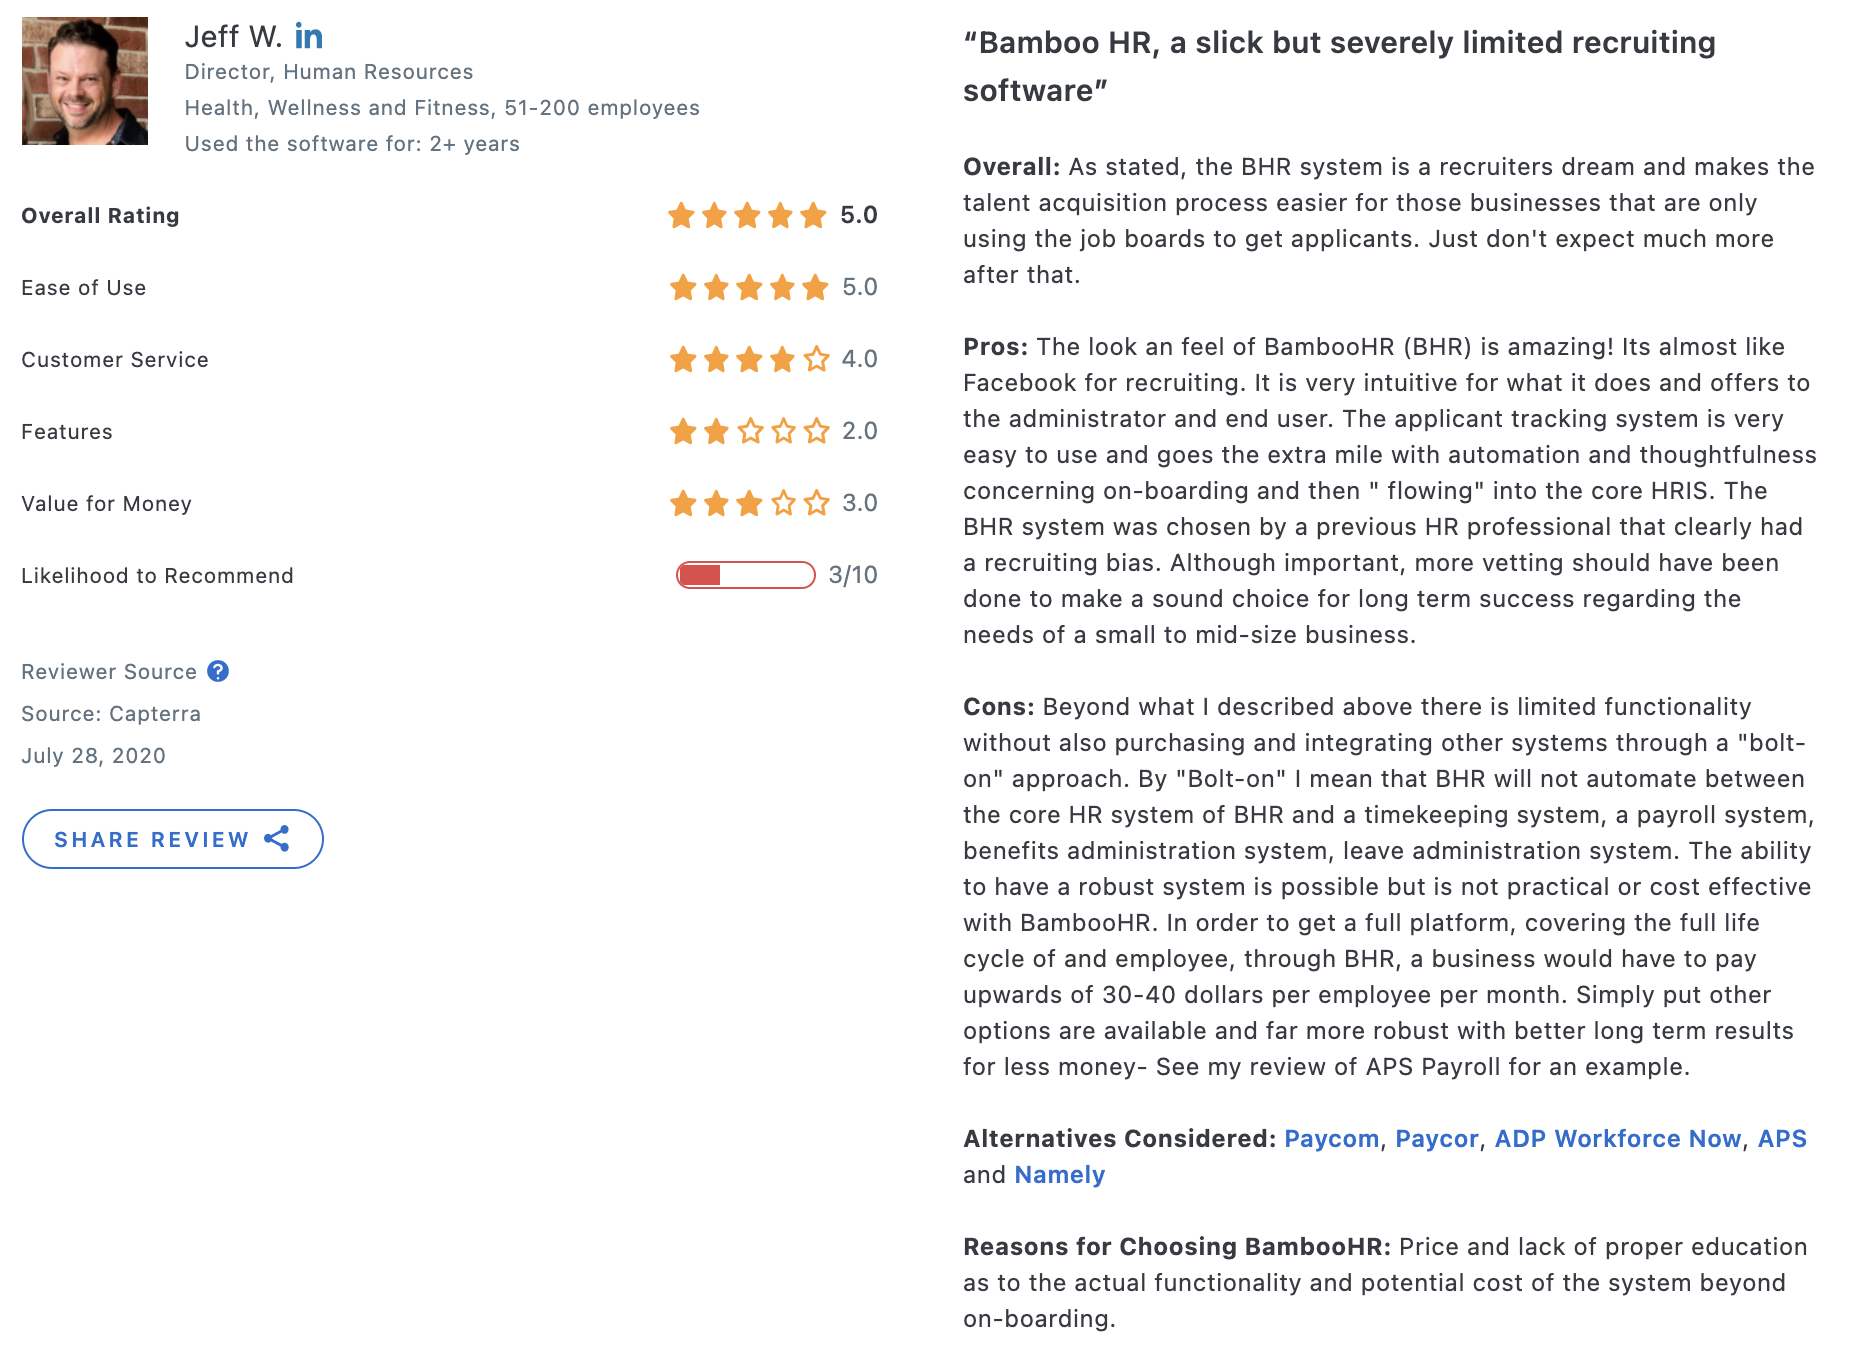 BambooHR reviews